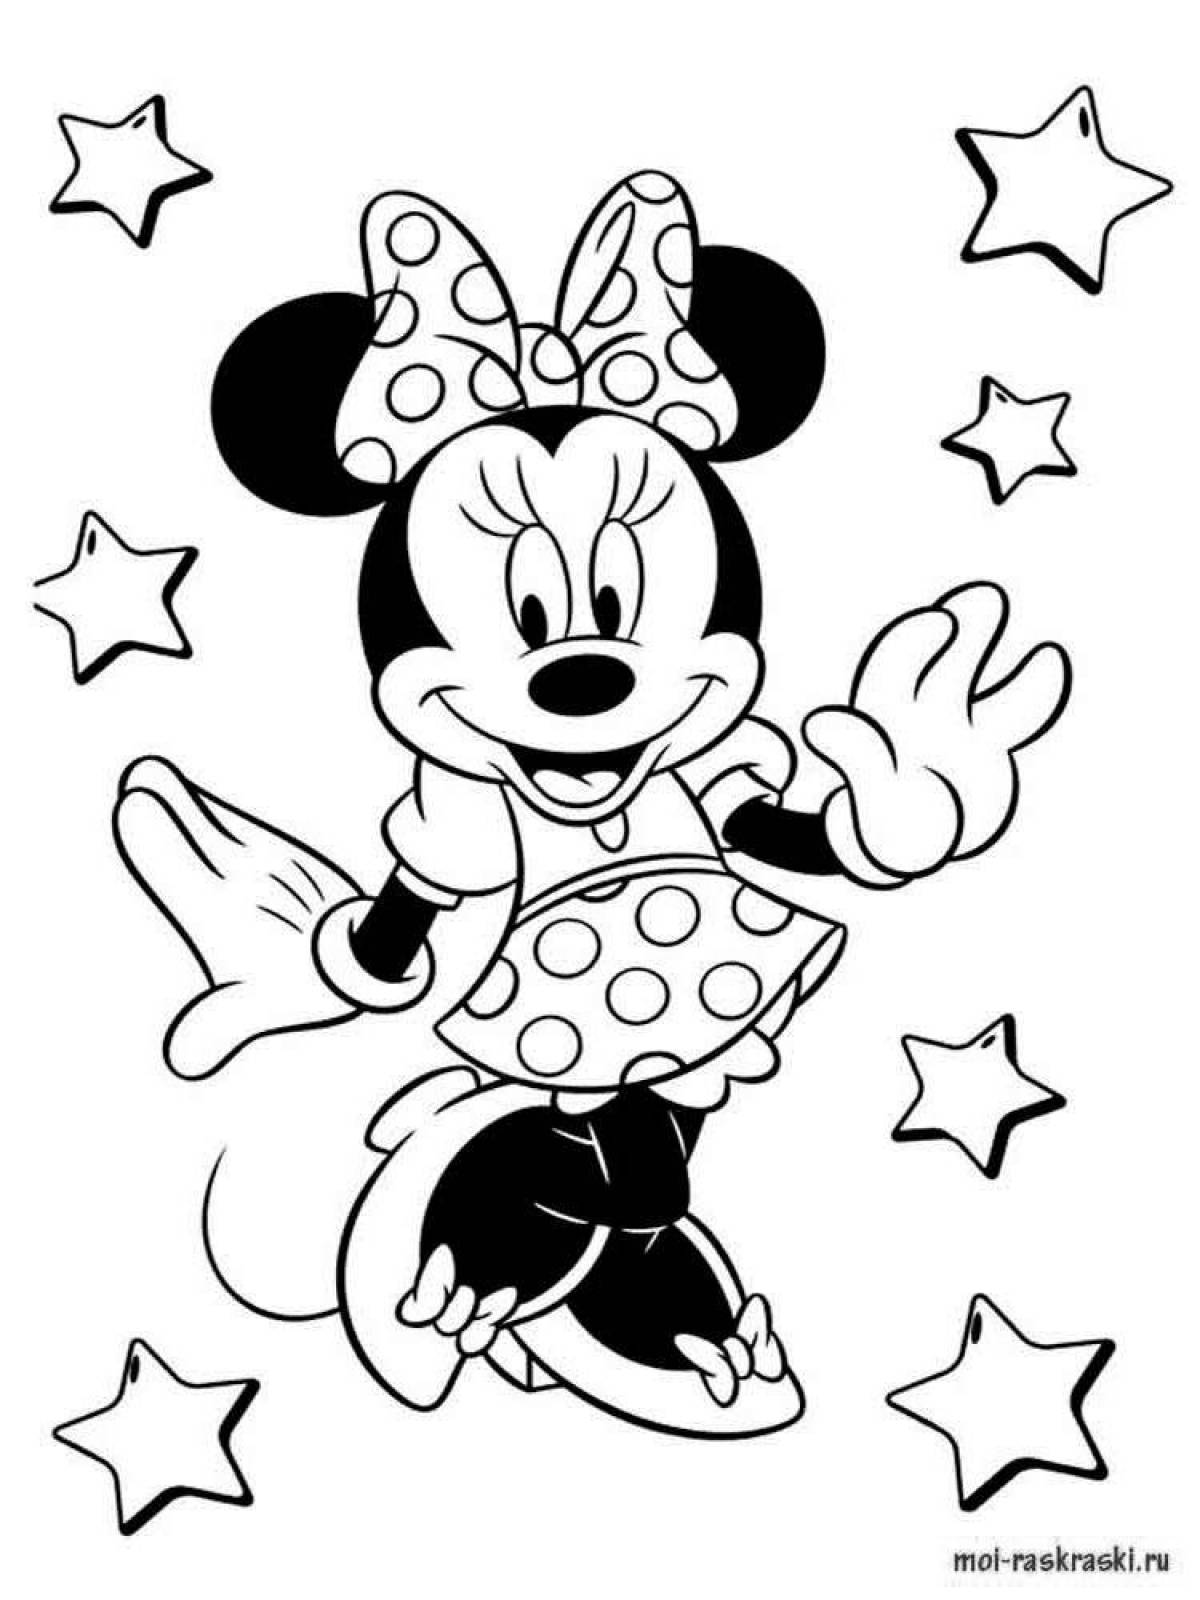 Cute minnie mouse coloring book